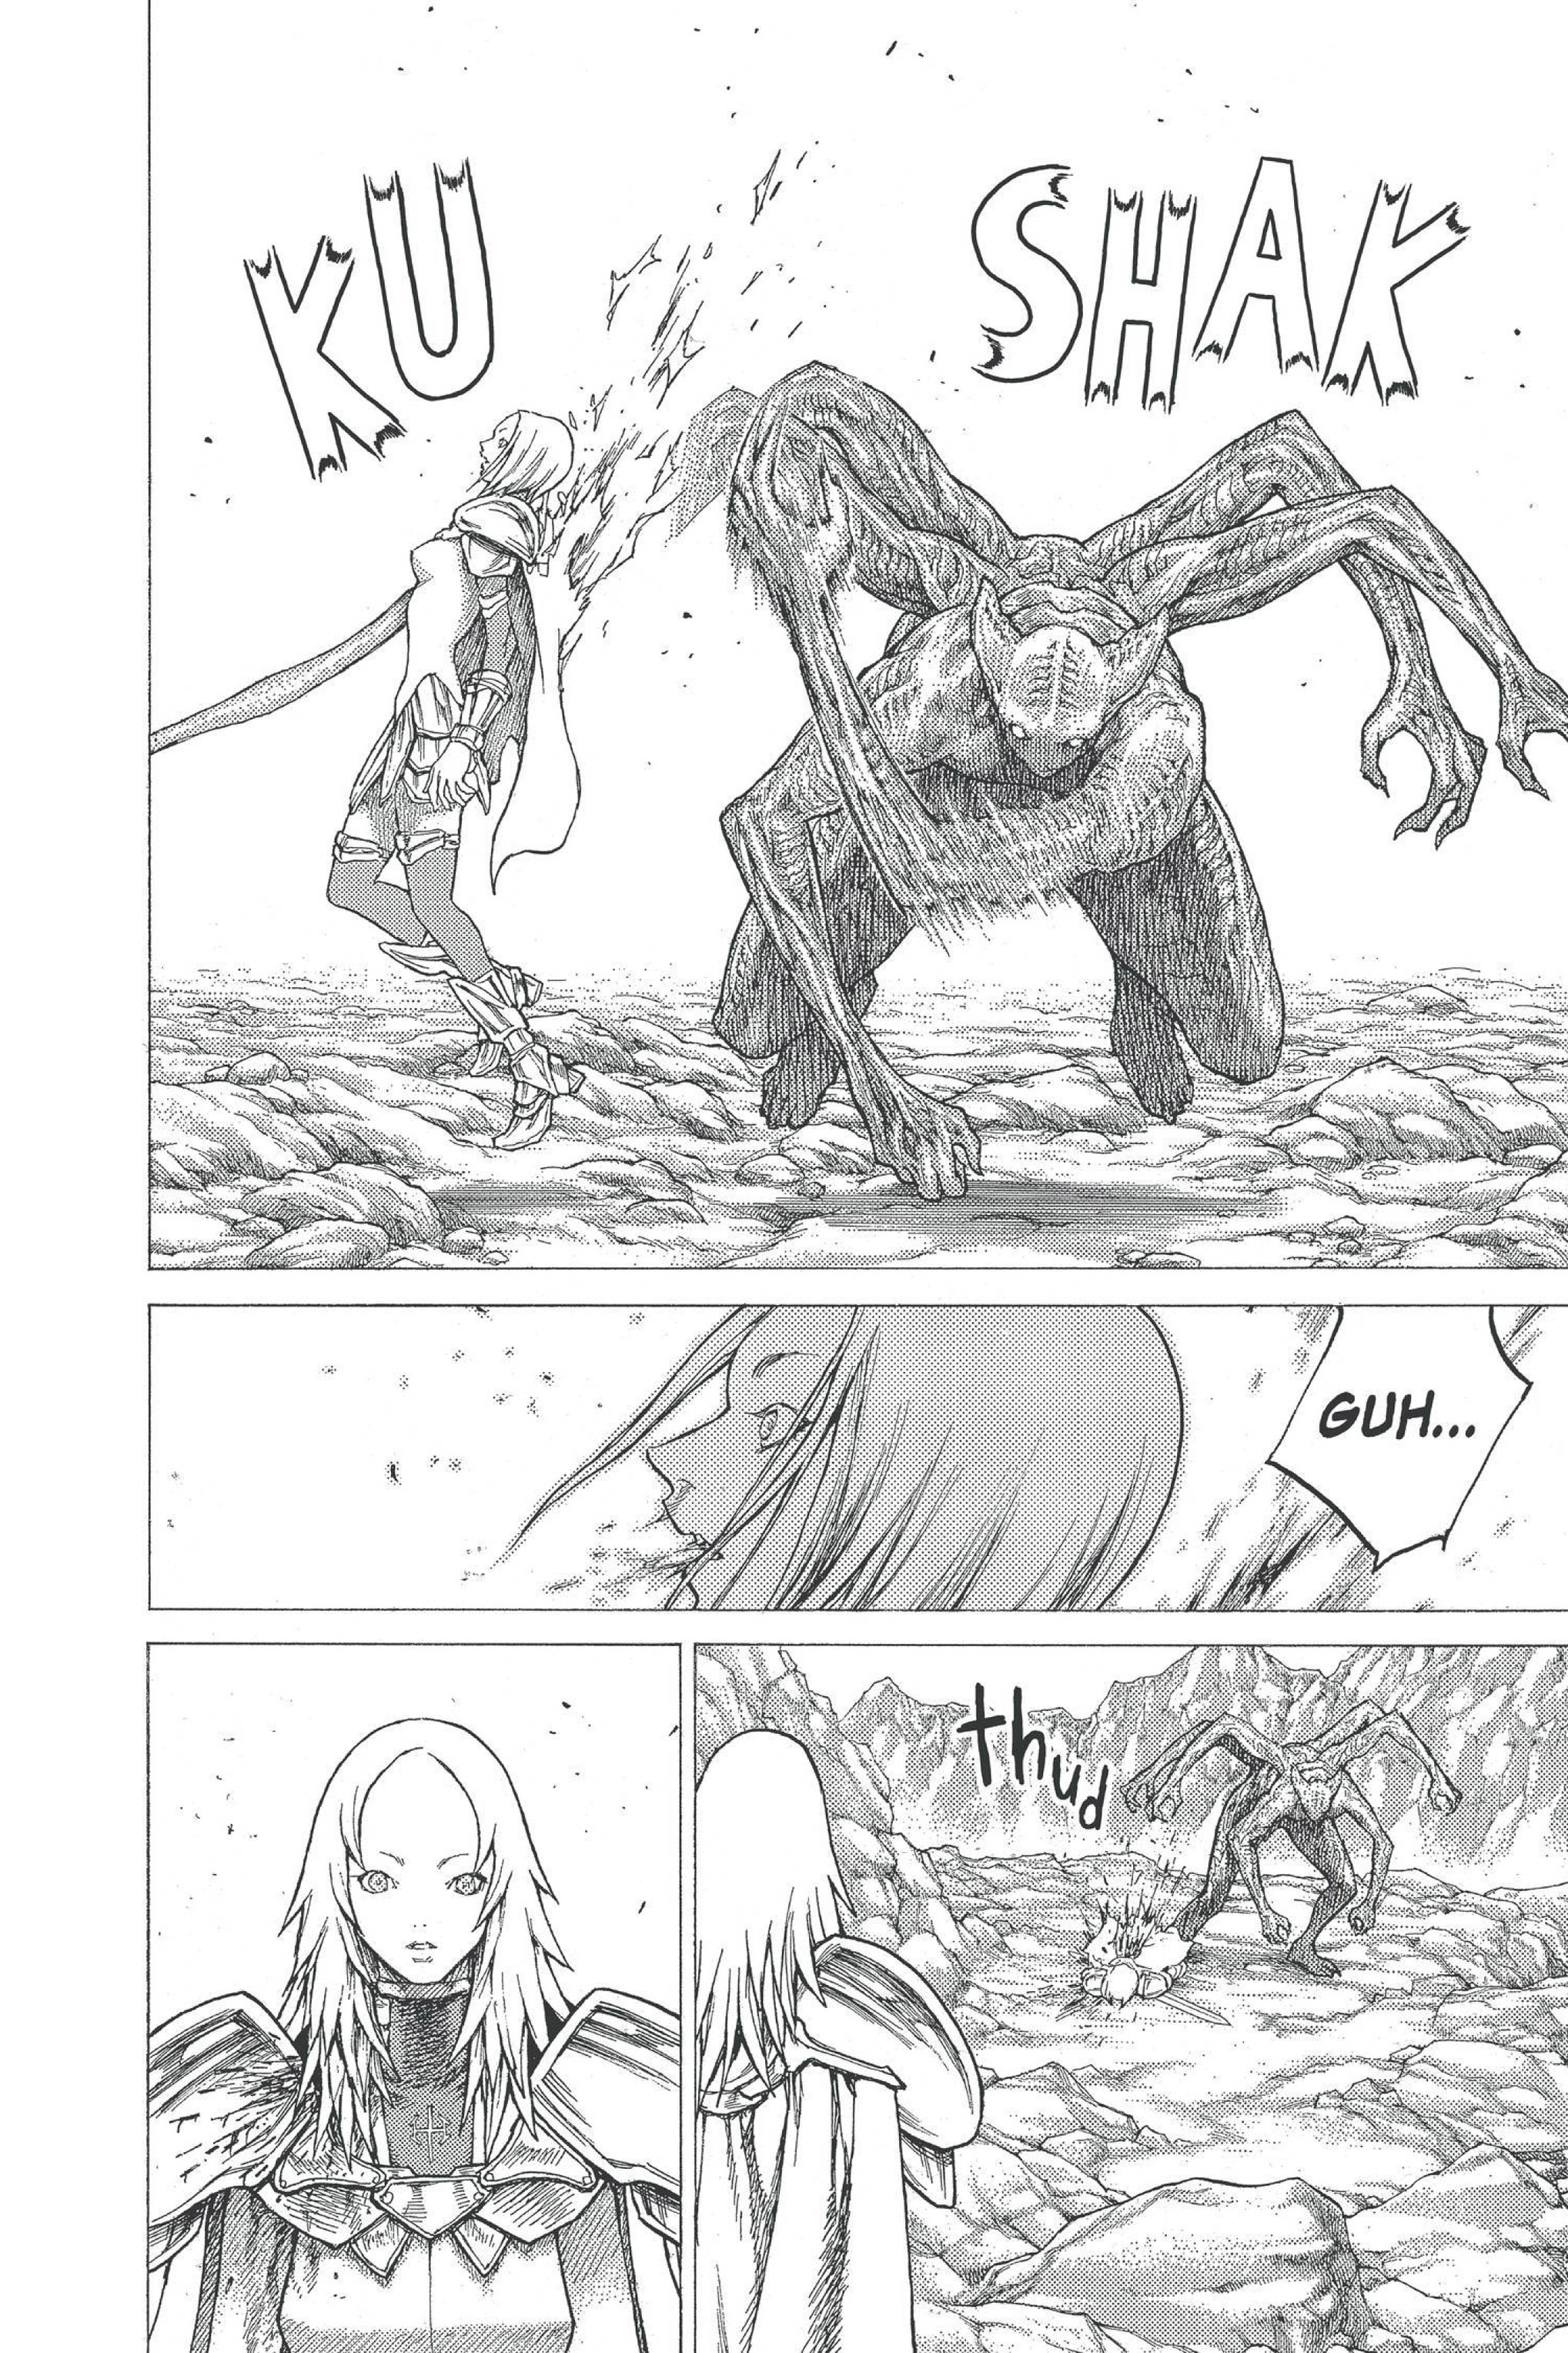 Read online Claymore comic -  Issue #5 - 177